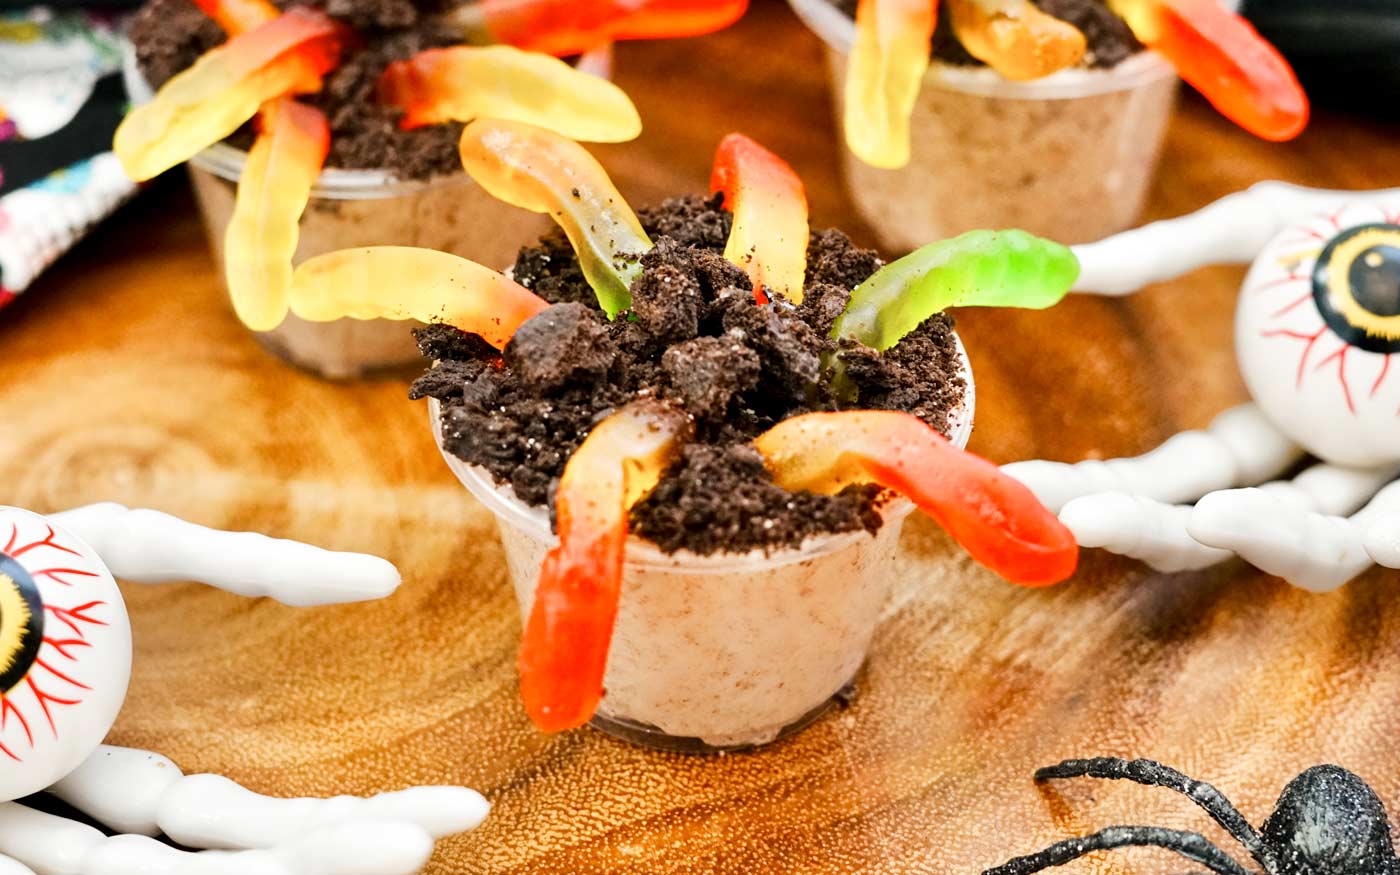 Halloween pudding shots made with chocolate pudding, baileys, vodka, whipped cream and topped with crushed oreos and garnished with gummy worms to look like dirt.